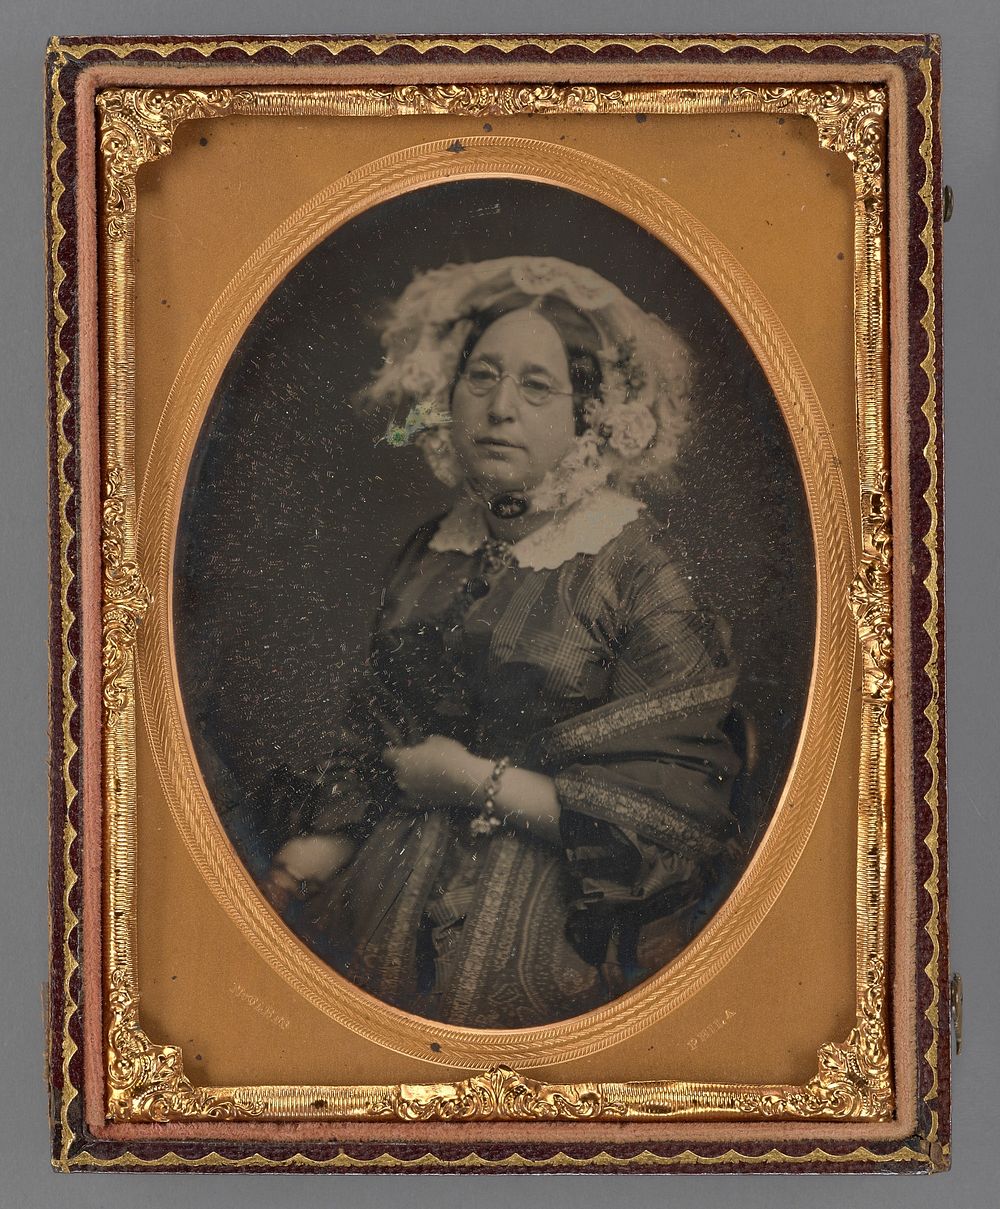 Portrait of a middle-aged woman wearing wire-rimmed glasses in flower embellished veil by James Earle McClees